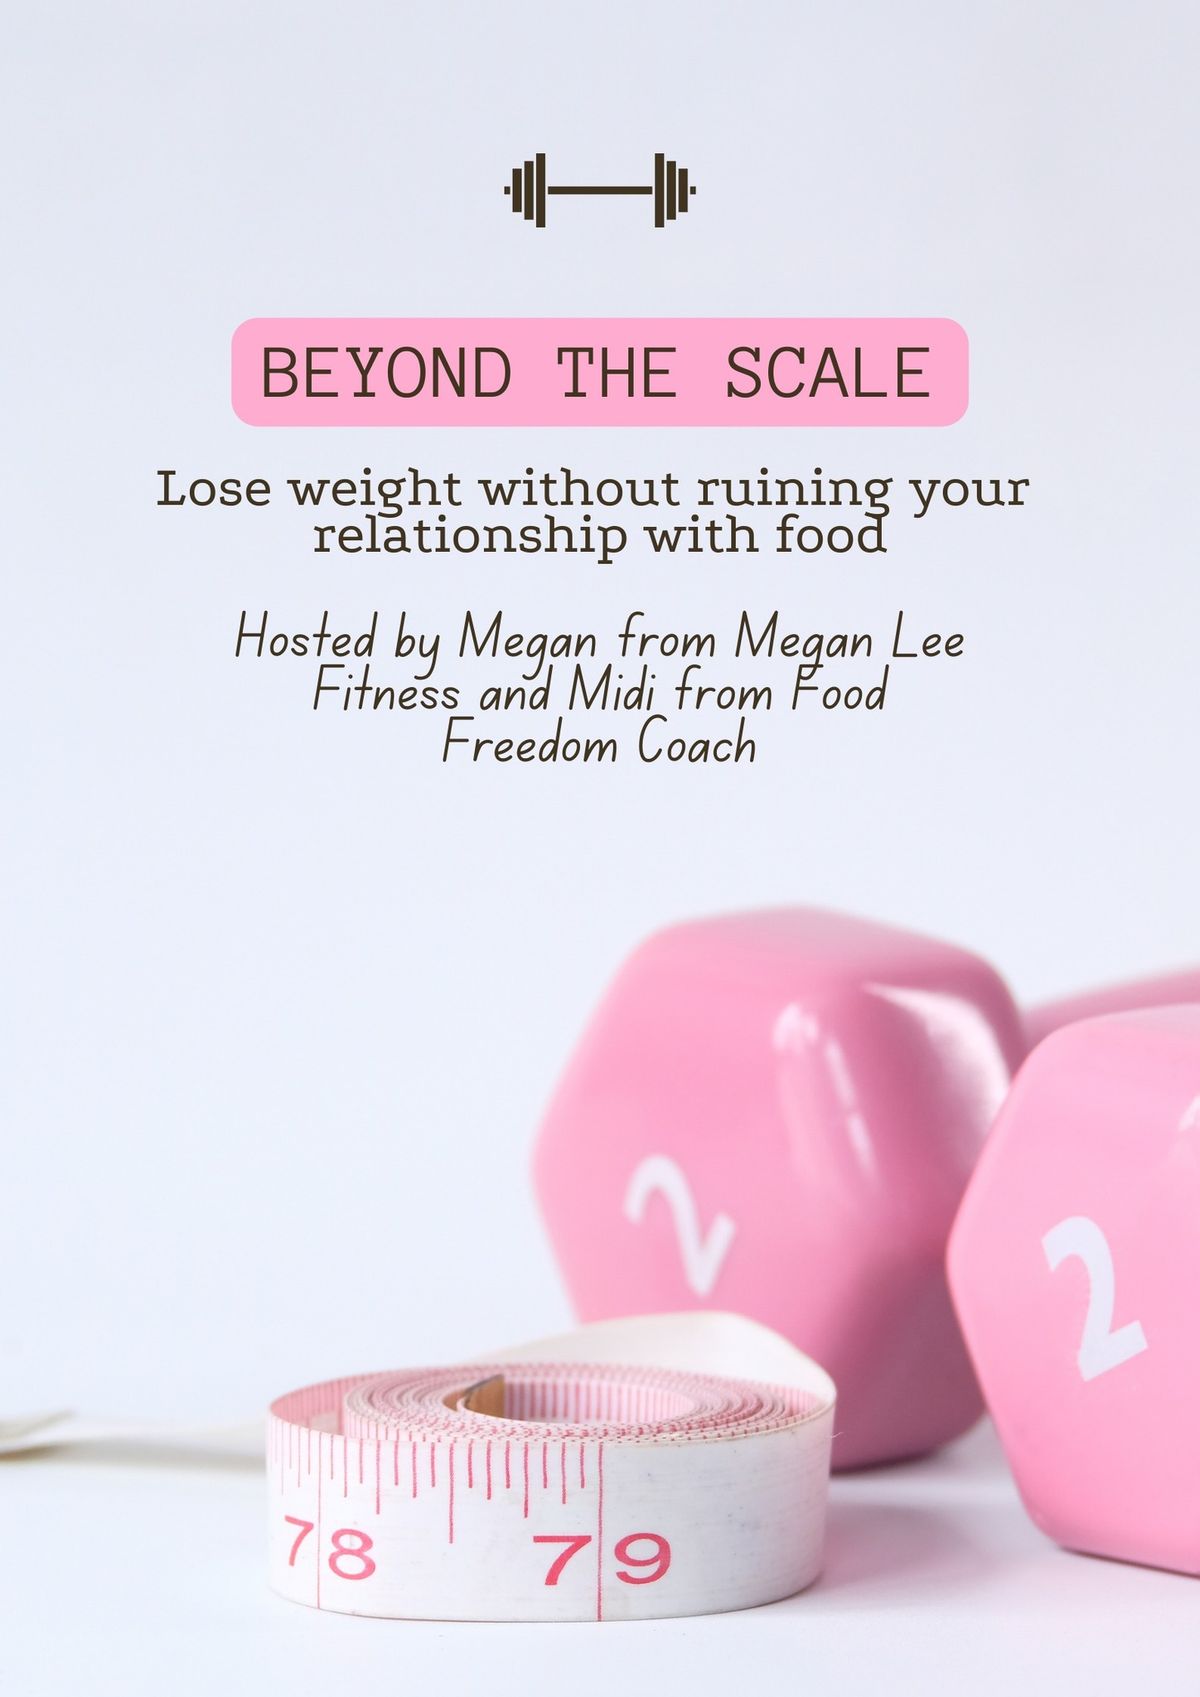 BEYOND THE SCALE: Lose weight without ruining your relationship with food